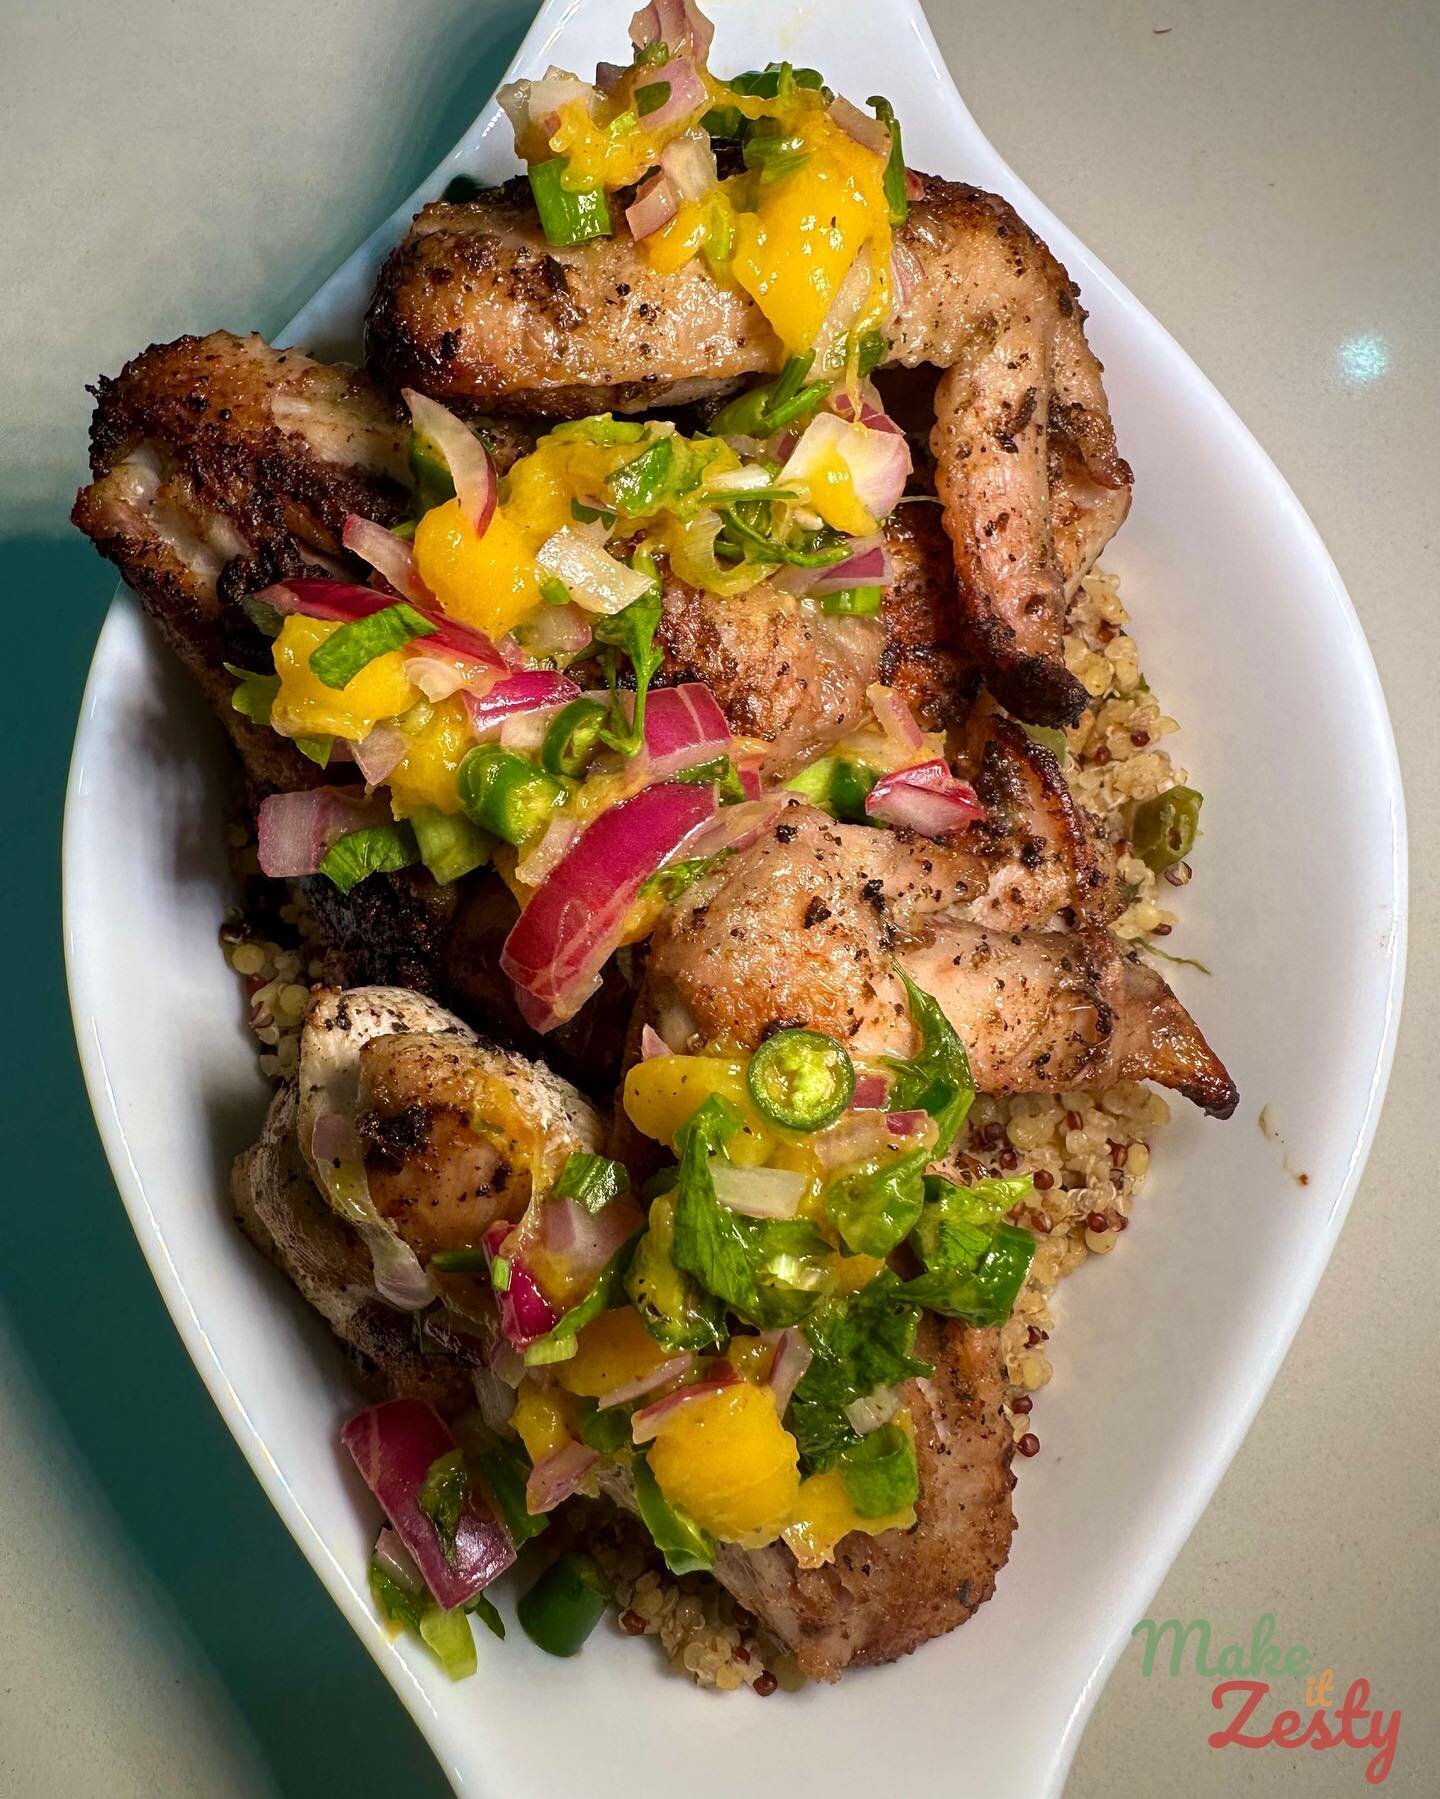 Foodies got creative in the kitchen  and whipped up some tasty mango salsa grilled chicken with quinoa! #mealprepping made easy with a little help from #ChefMIZ 

#makeitzesty #homemadecooking #freshmango homemade #privatechef #foodies #foodstagram